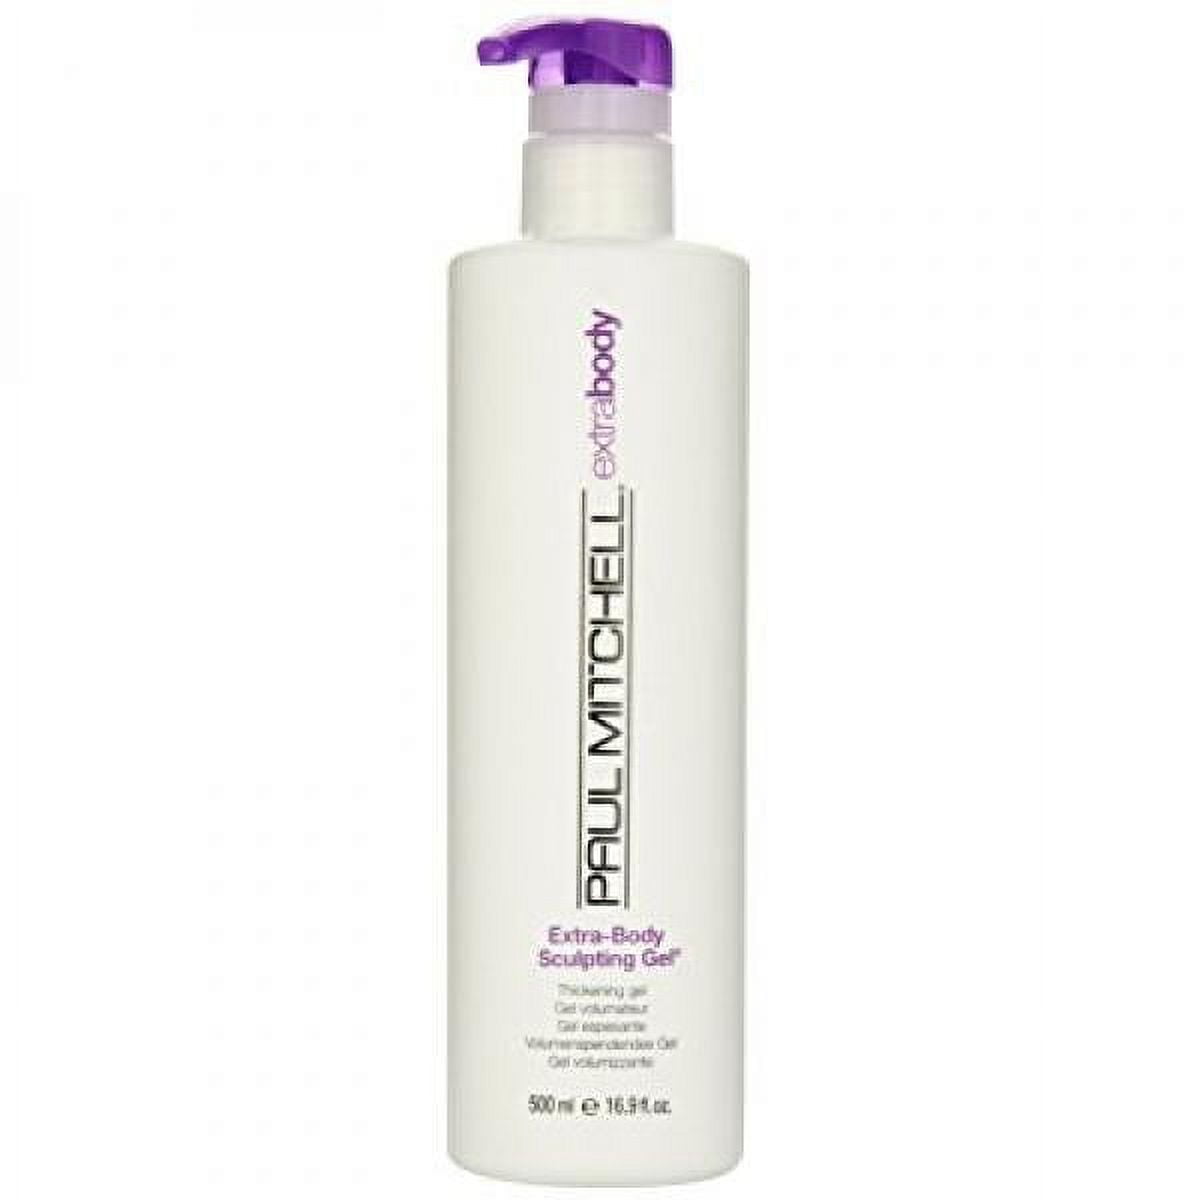 Paul Mitchell Extra-body Sculpting Gel, Thickening Gel, 16.9-ounce